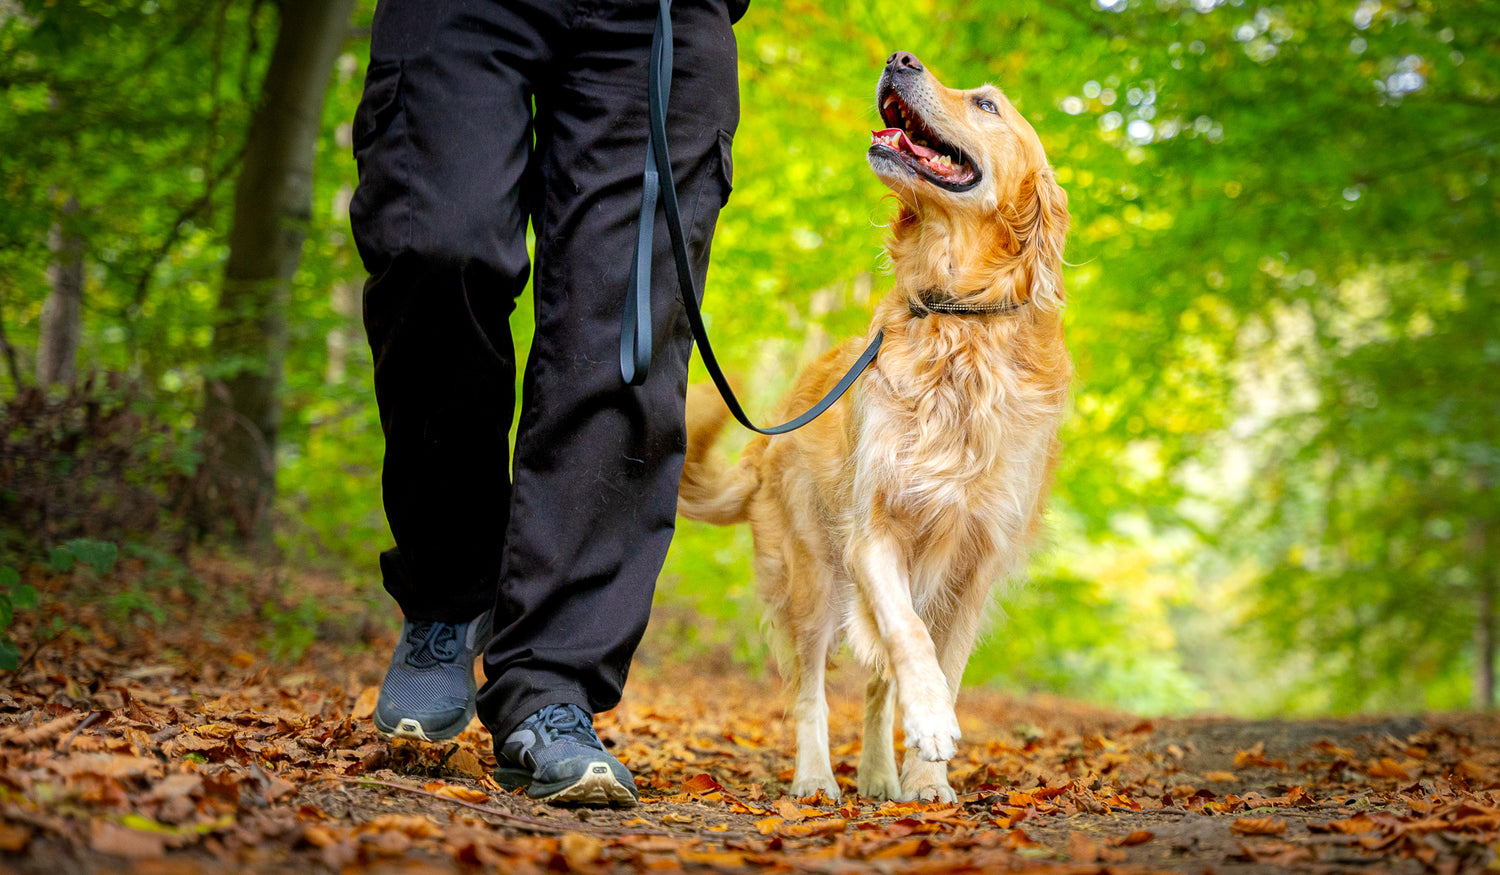 A golden retriever walking on a loose lead with smiley face, looking up at our dog trainer in a woodland setting with early autumnal leaves on the ground.